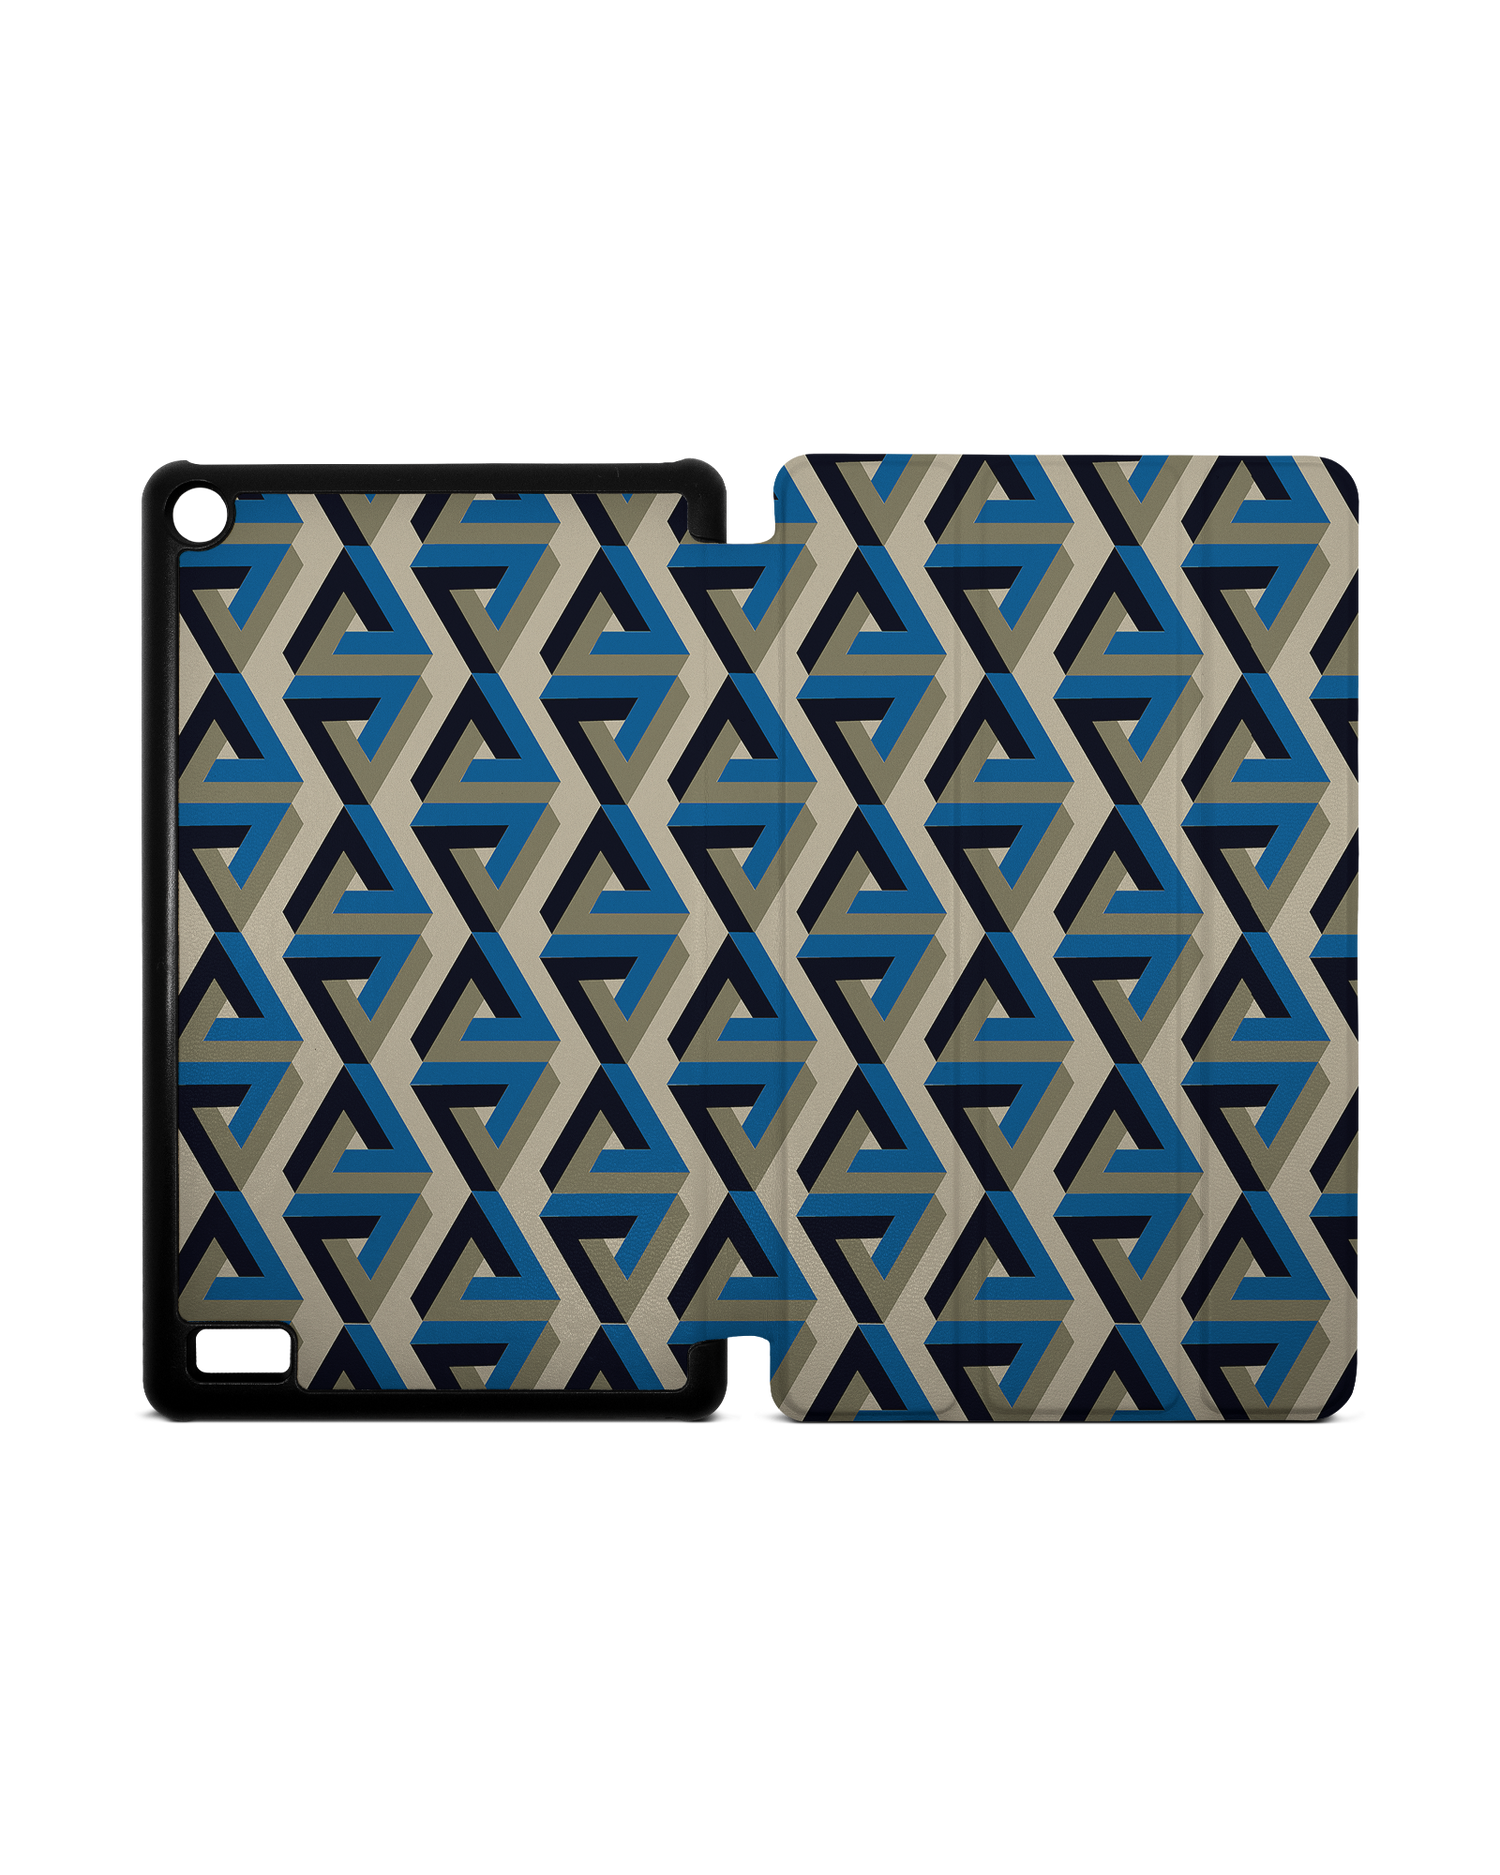 Penrose Pattern Tablet Smart Case for Amazon Fire 7: Opened